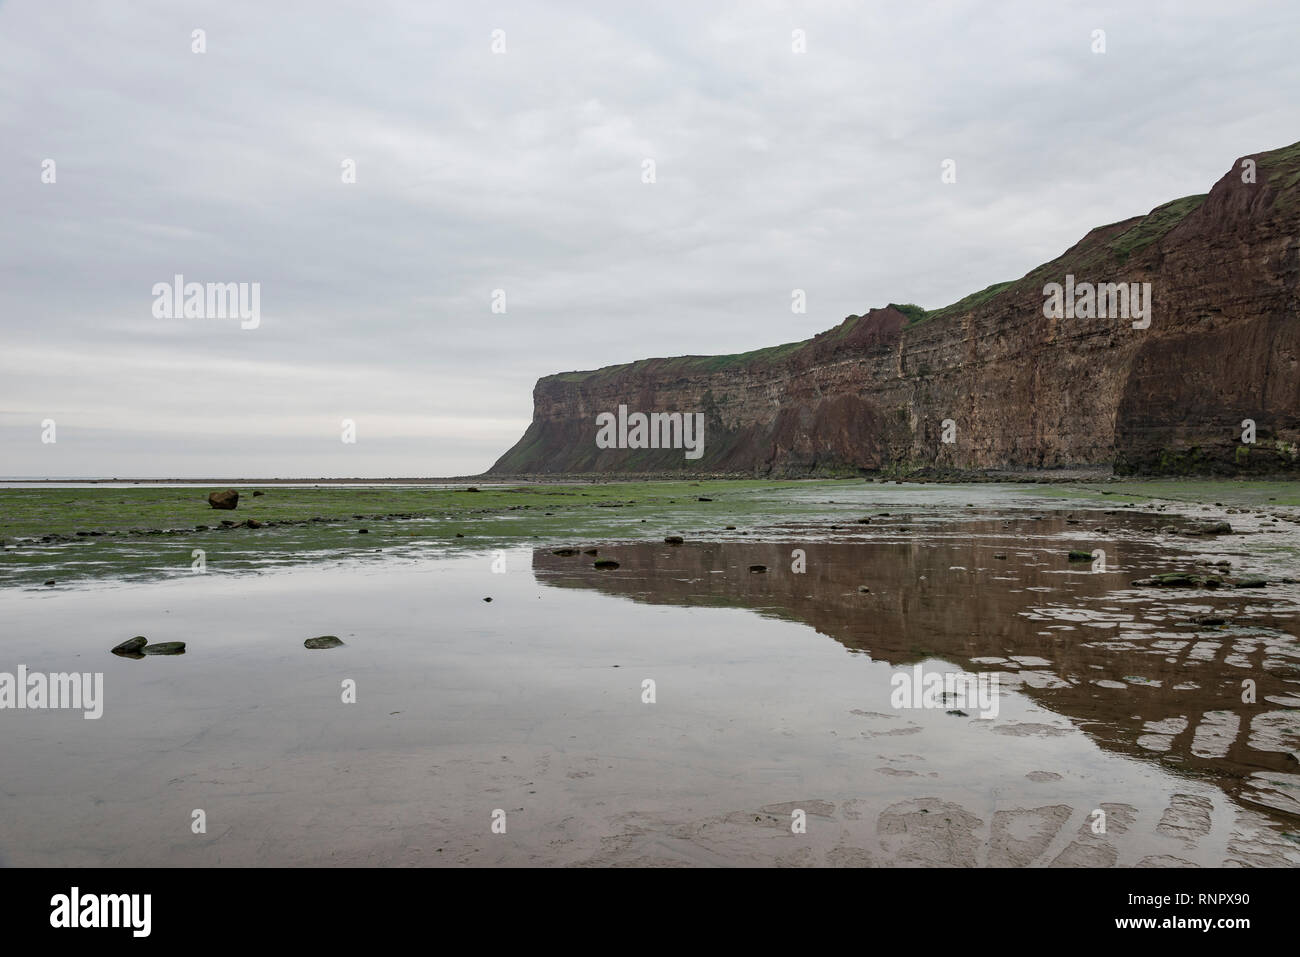 Sheer cliffs at Huntcliff, Saltburn-by-the-sea, North Yorkshire, England. Stock Photo